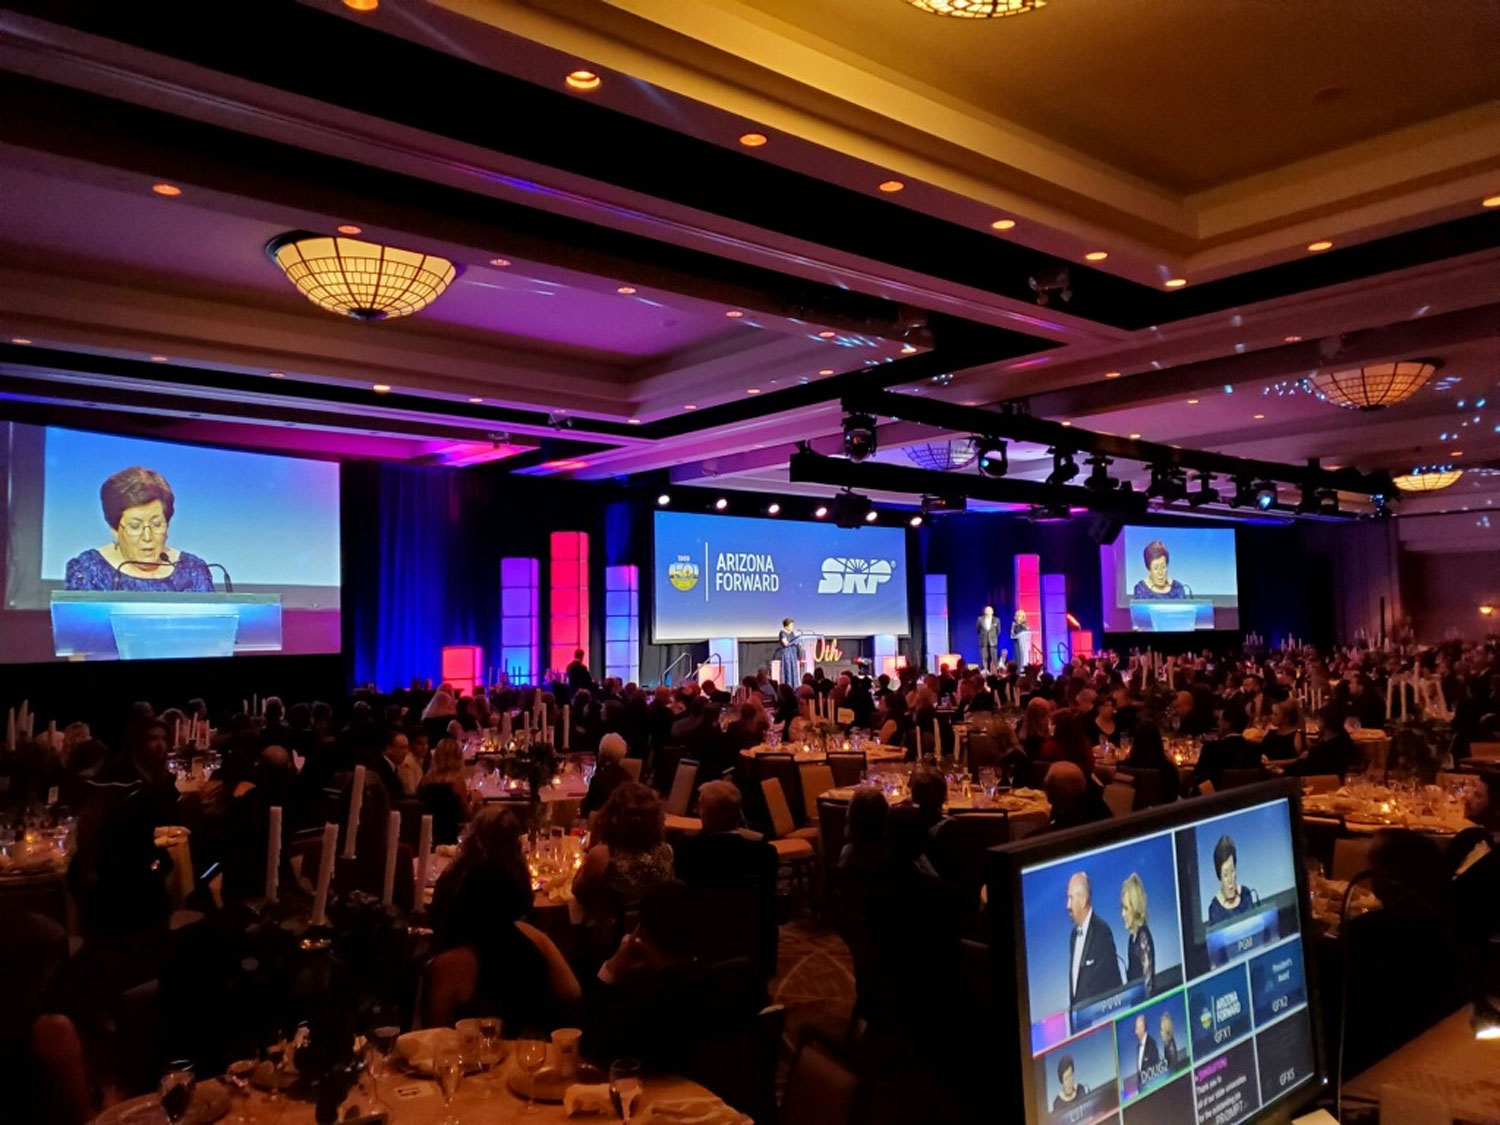 photo of crowd and screens from gala event